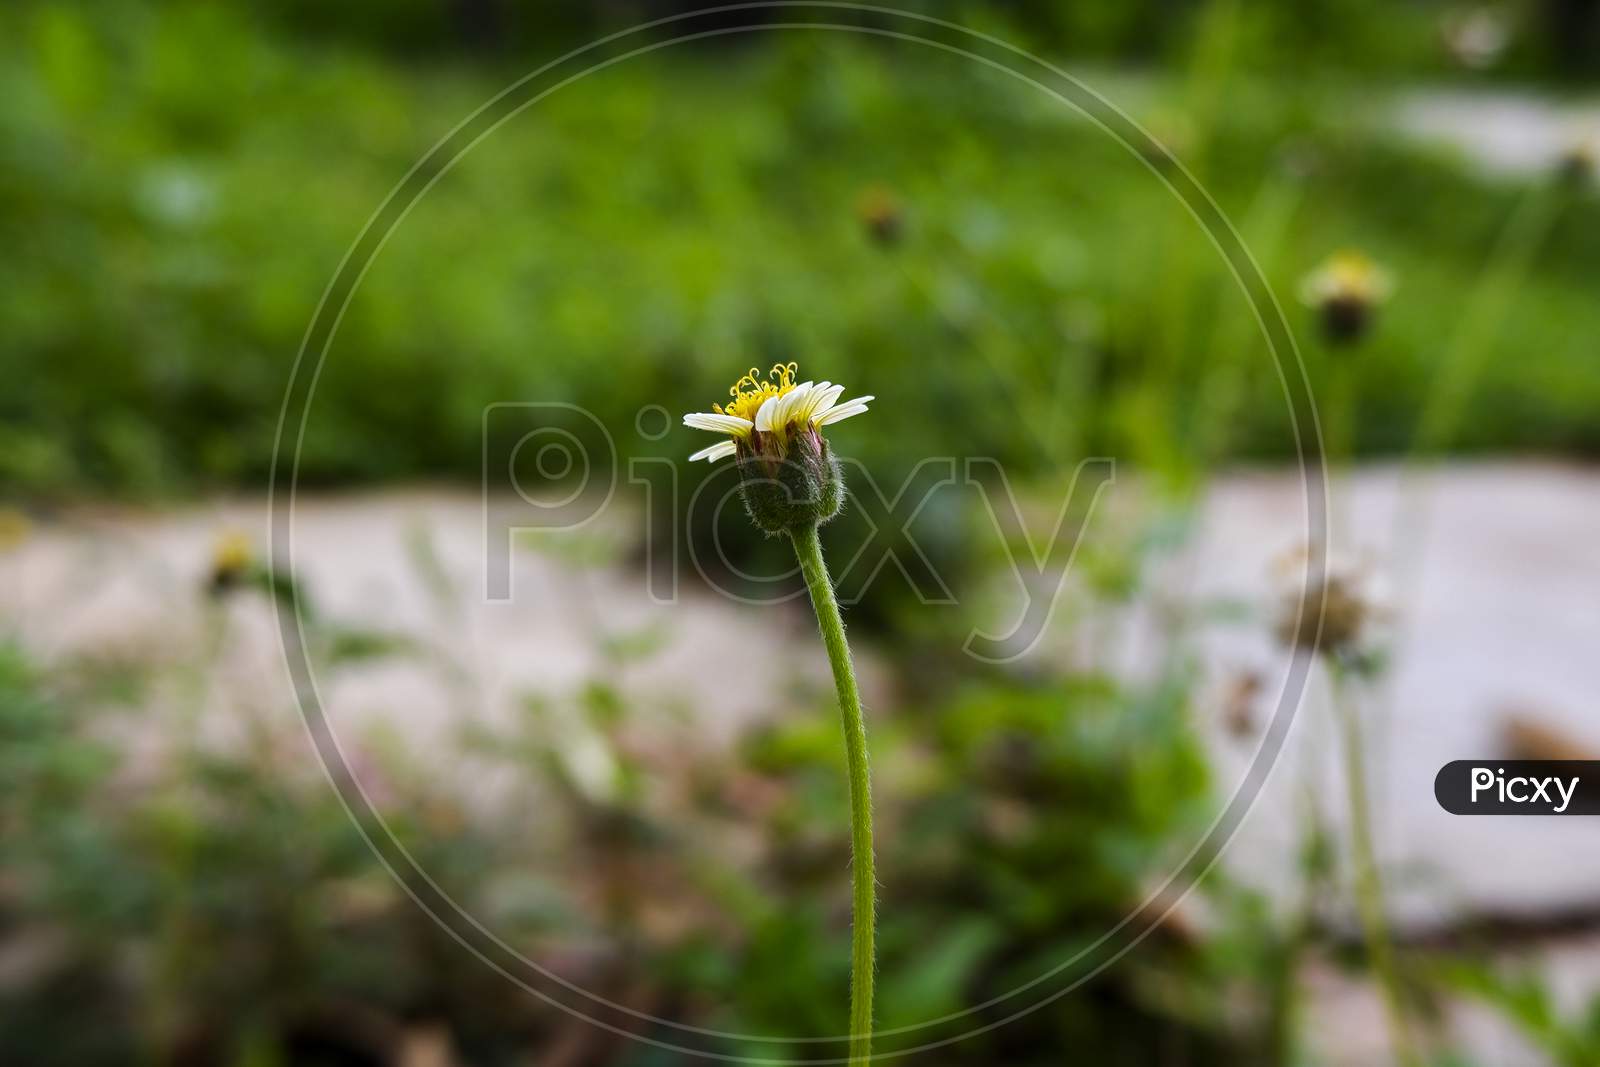 Small Grass Flower Isolated In Green Garden